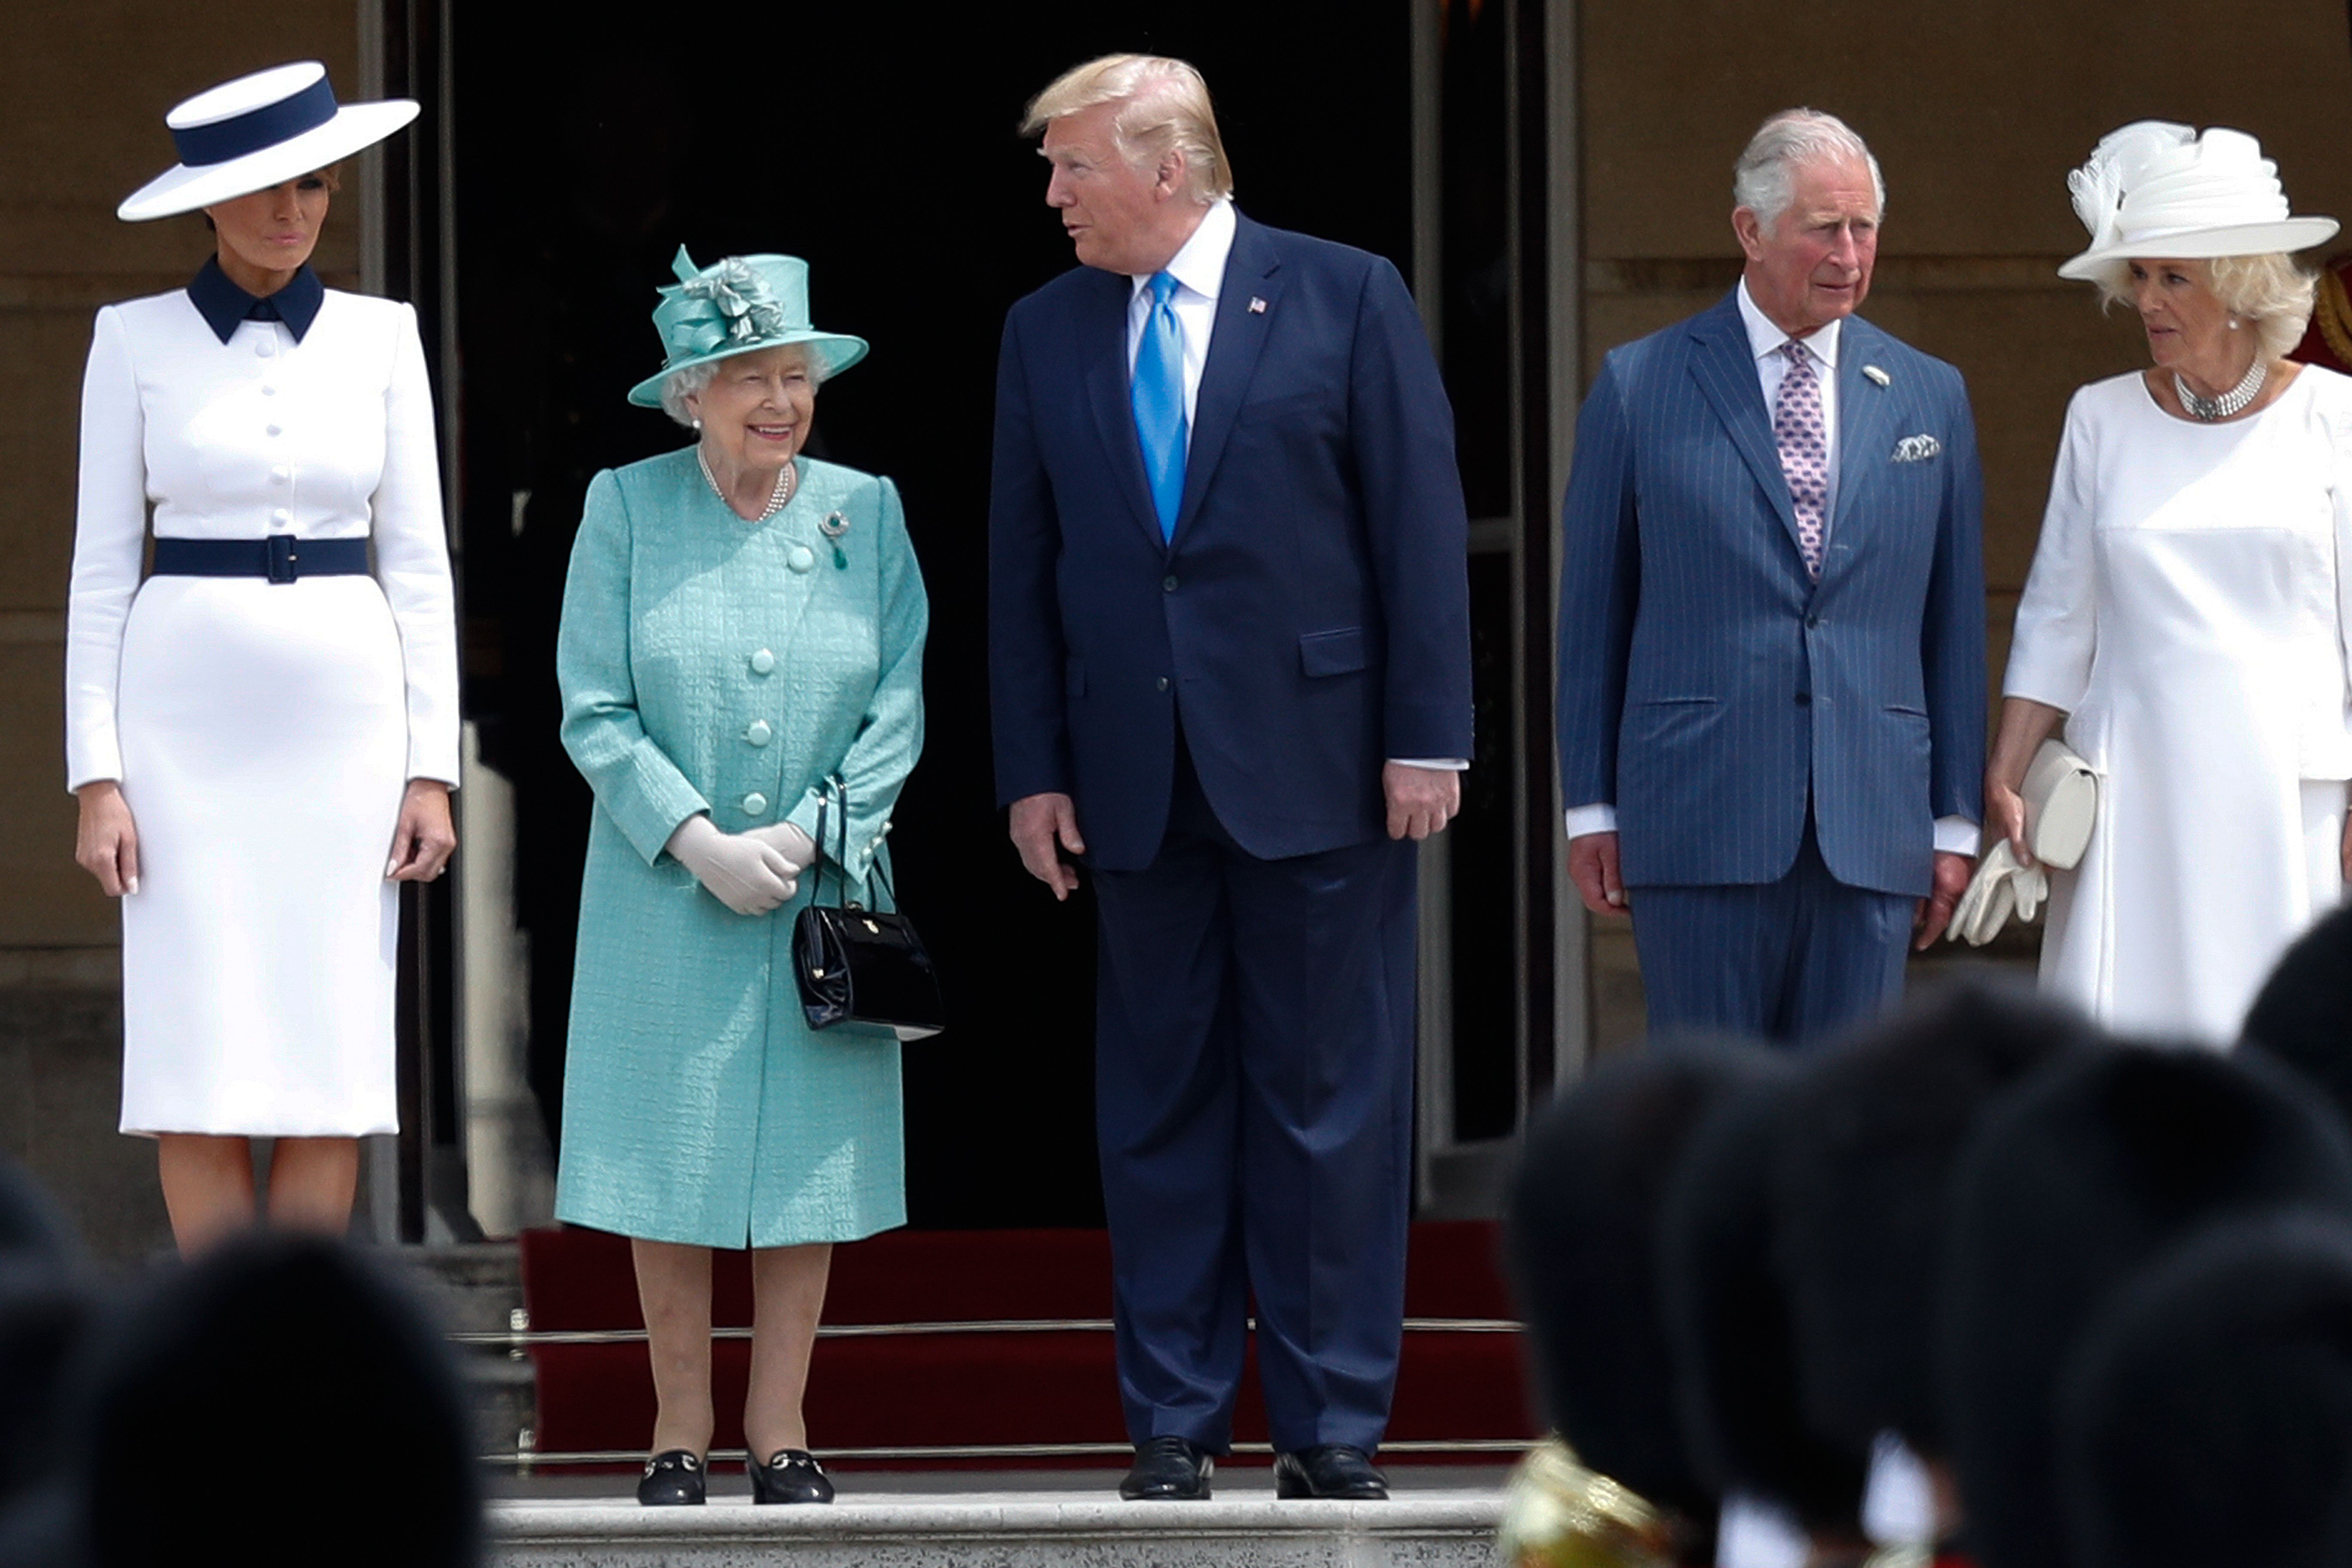 US First Lady Melania Trump, Britain's Queen Elizabeth II, US President Donald Trump, Britain's Prince Charles, Prince of Wales and Britain's Camilla, Duchess of Cornwall pose for a photograph during a ceremonial welcome in the garden of Buckingham Palace on the opening day of a three day state visit to Britain, London, June 3, 2019.